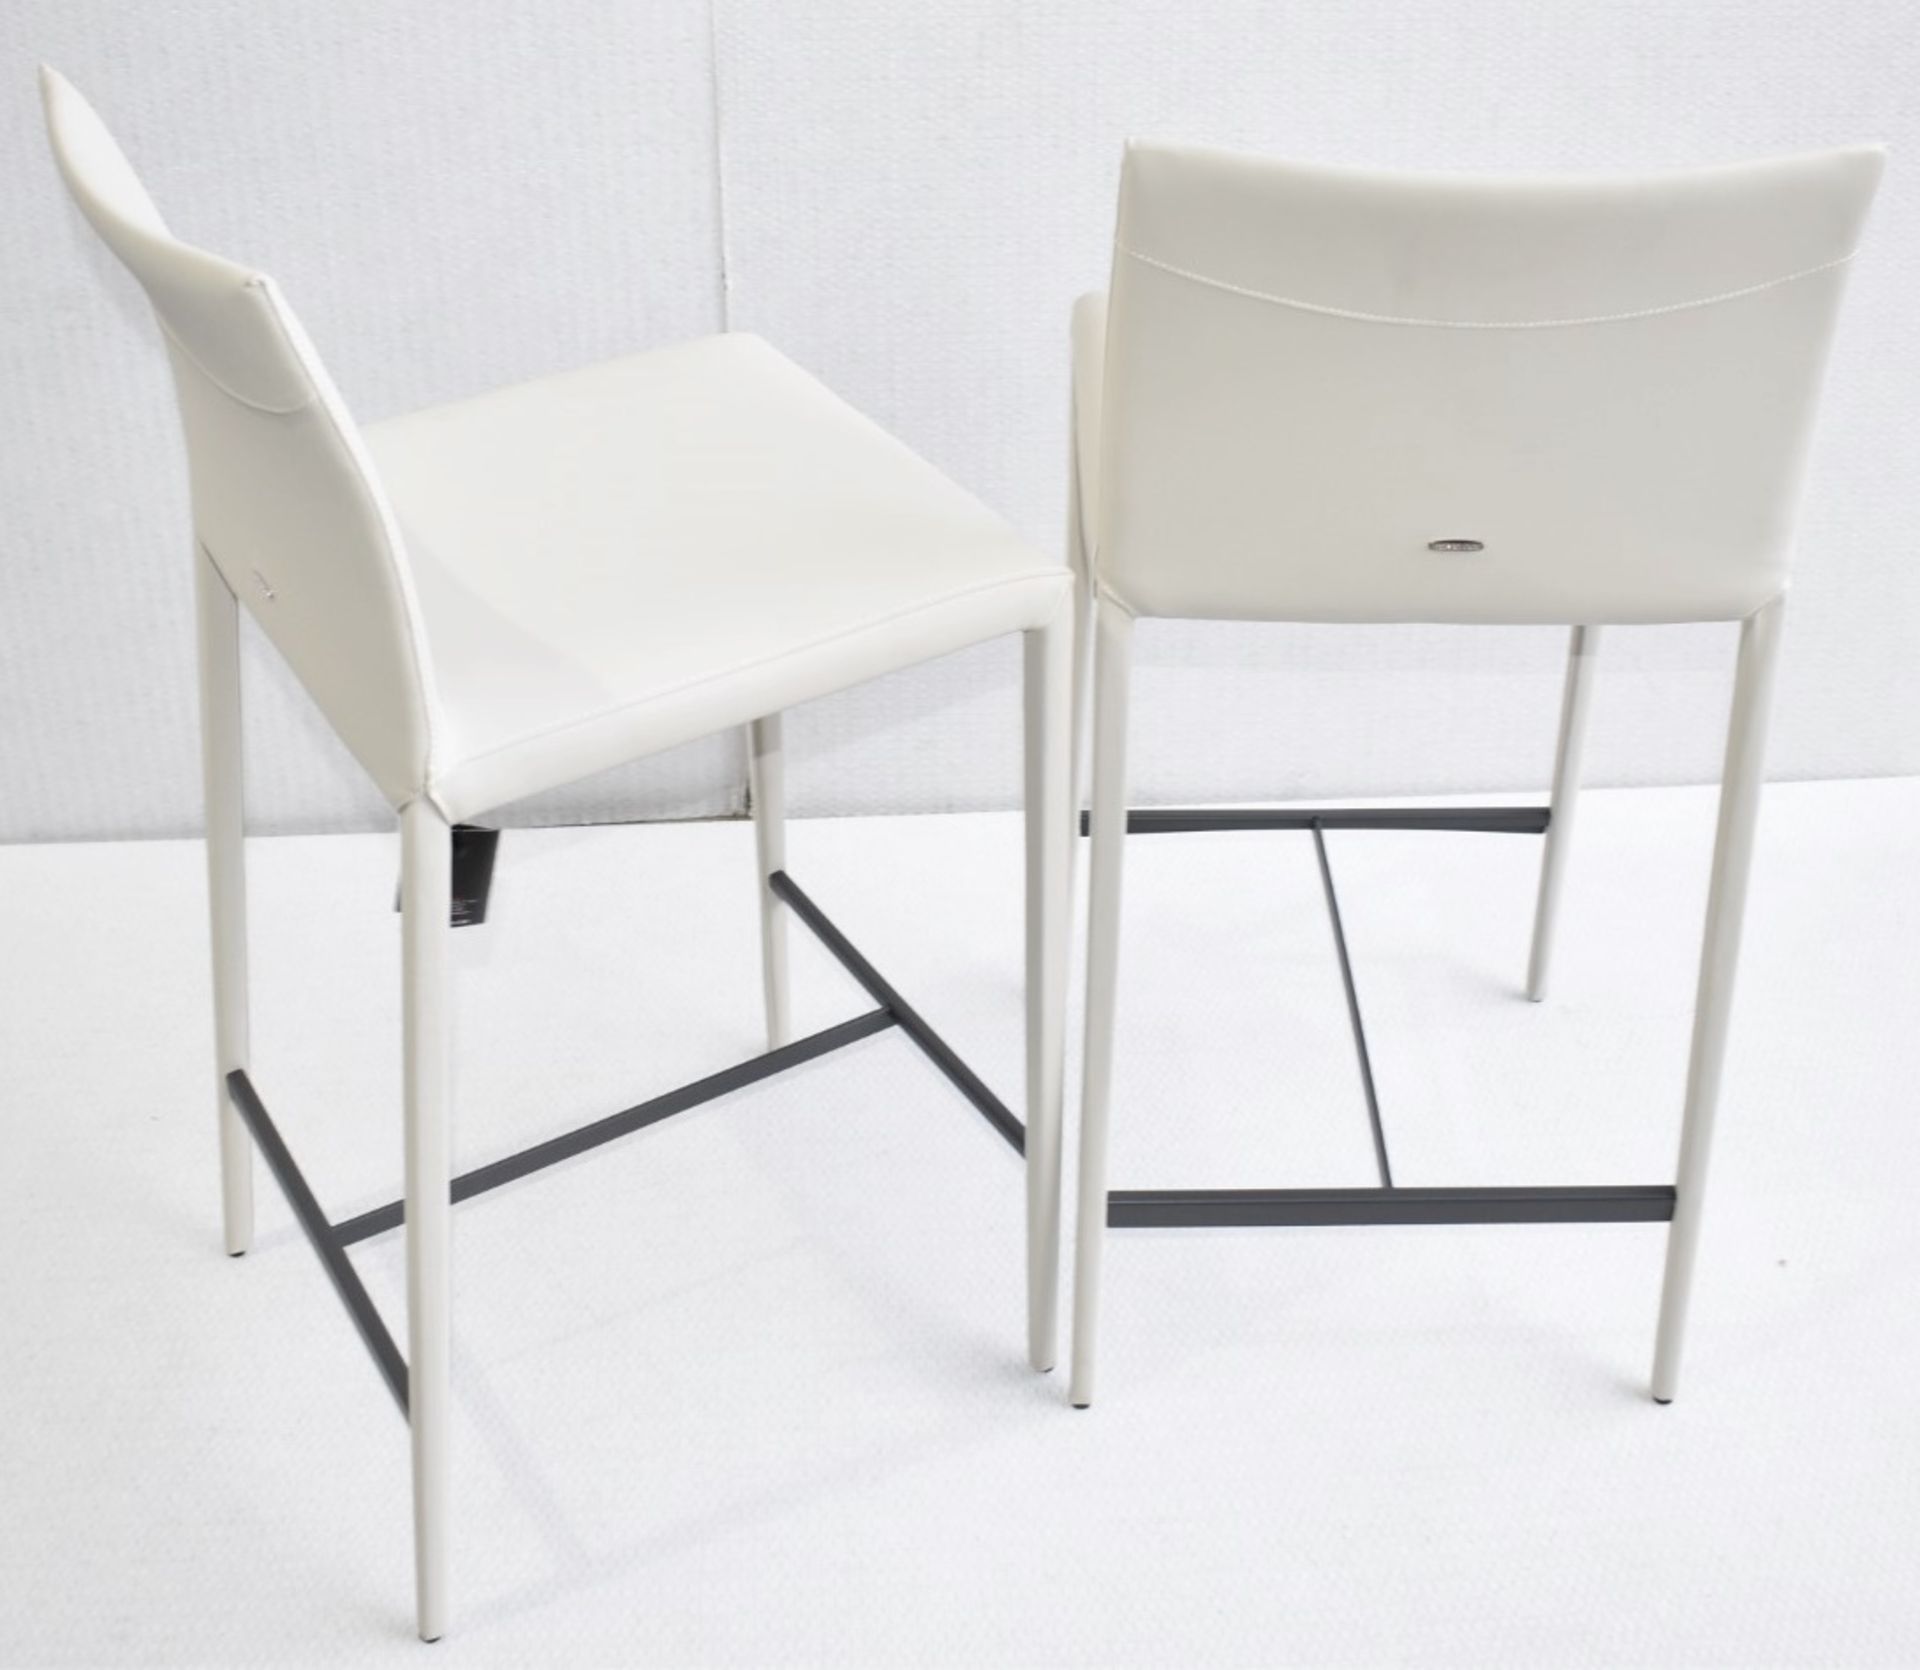 Pair of CATTELAN ITALIA 'Norma' Designer Fully Upholstered Stools in a Light Synthetic Leather - Image 8 of 9